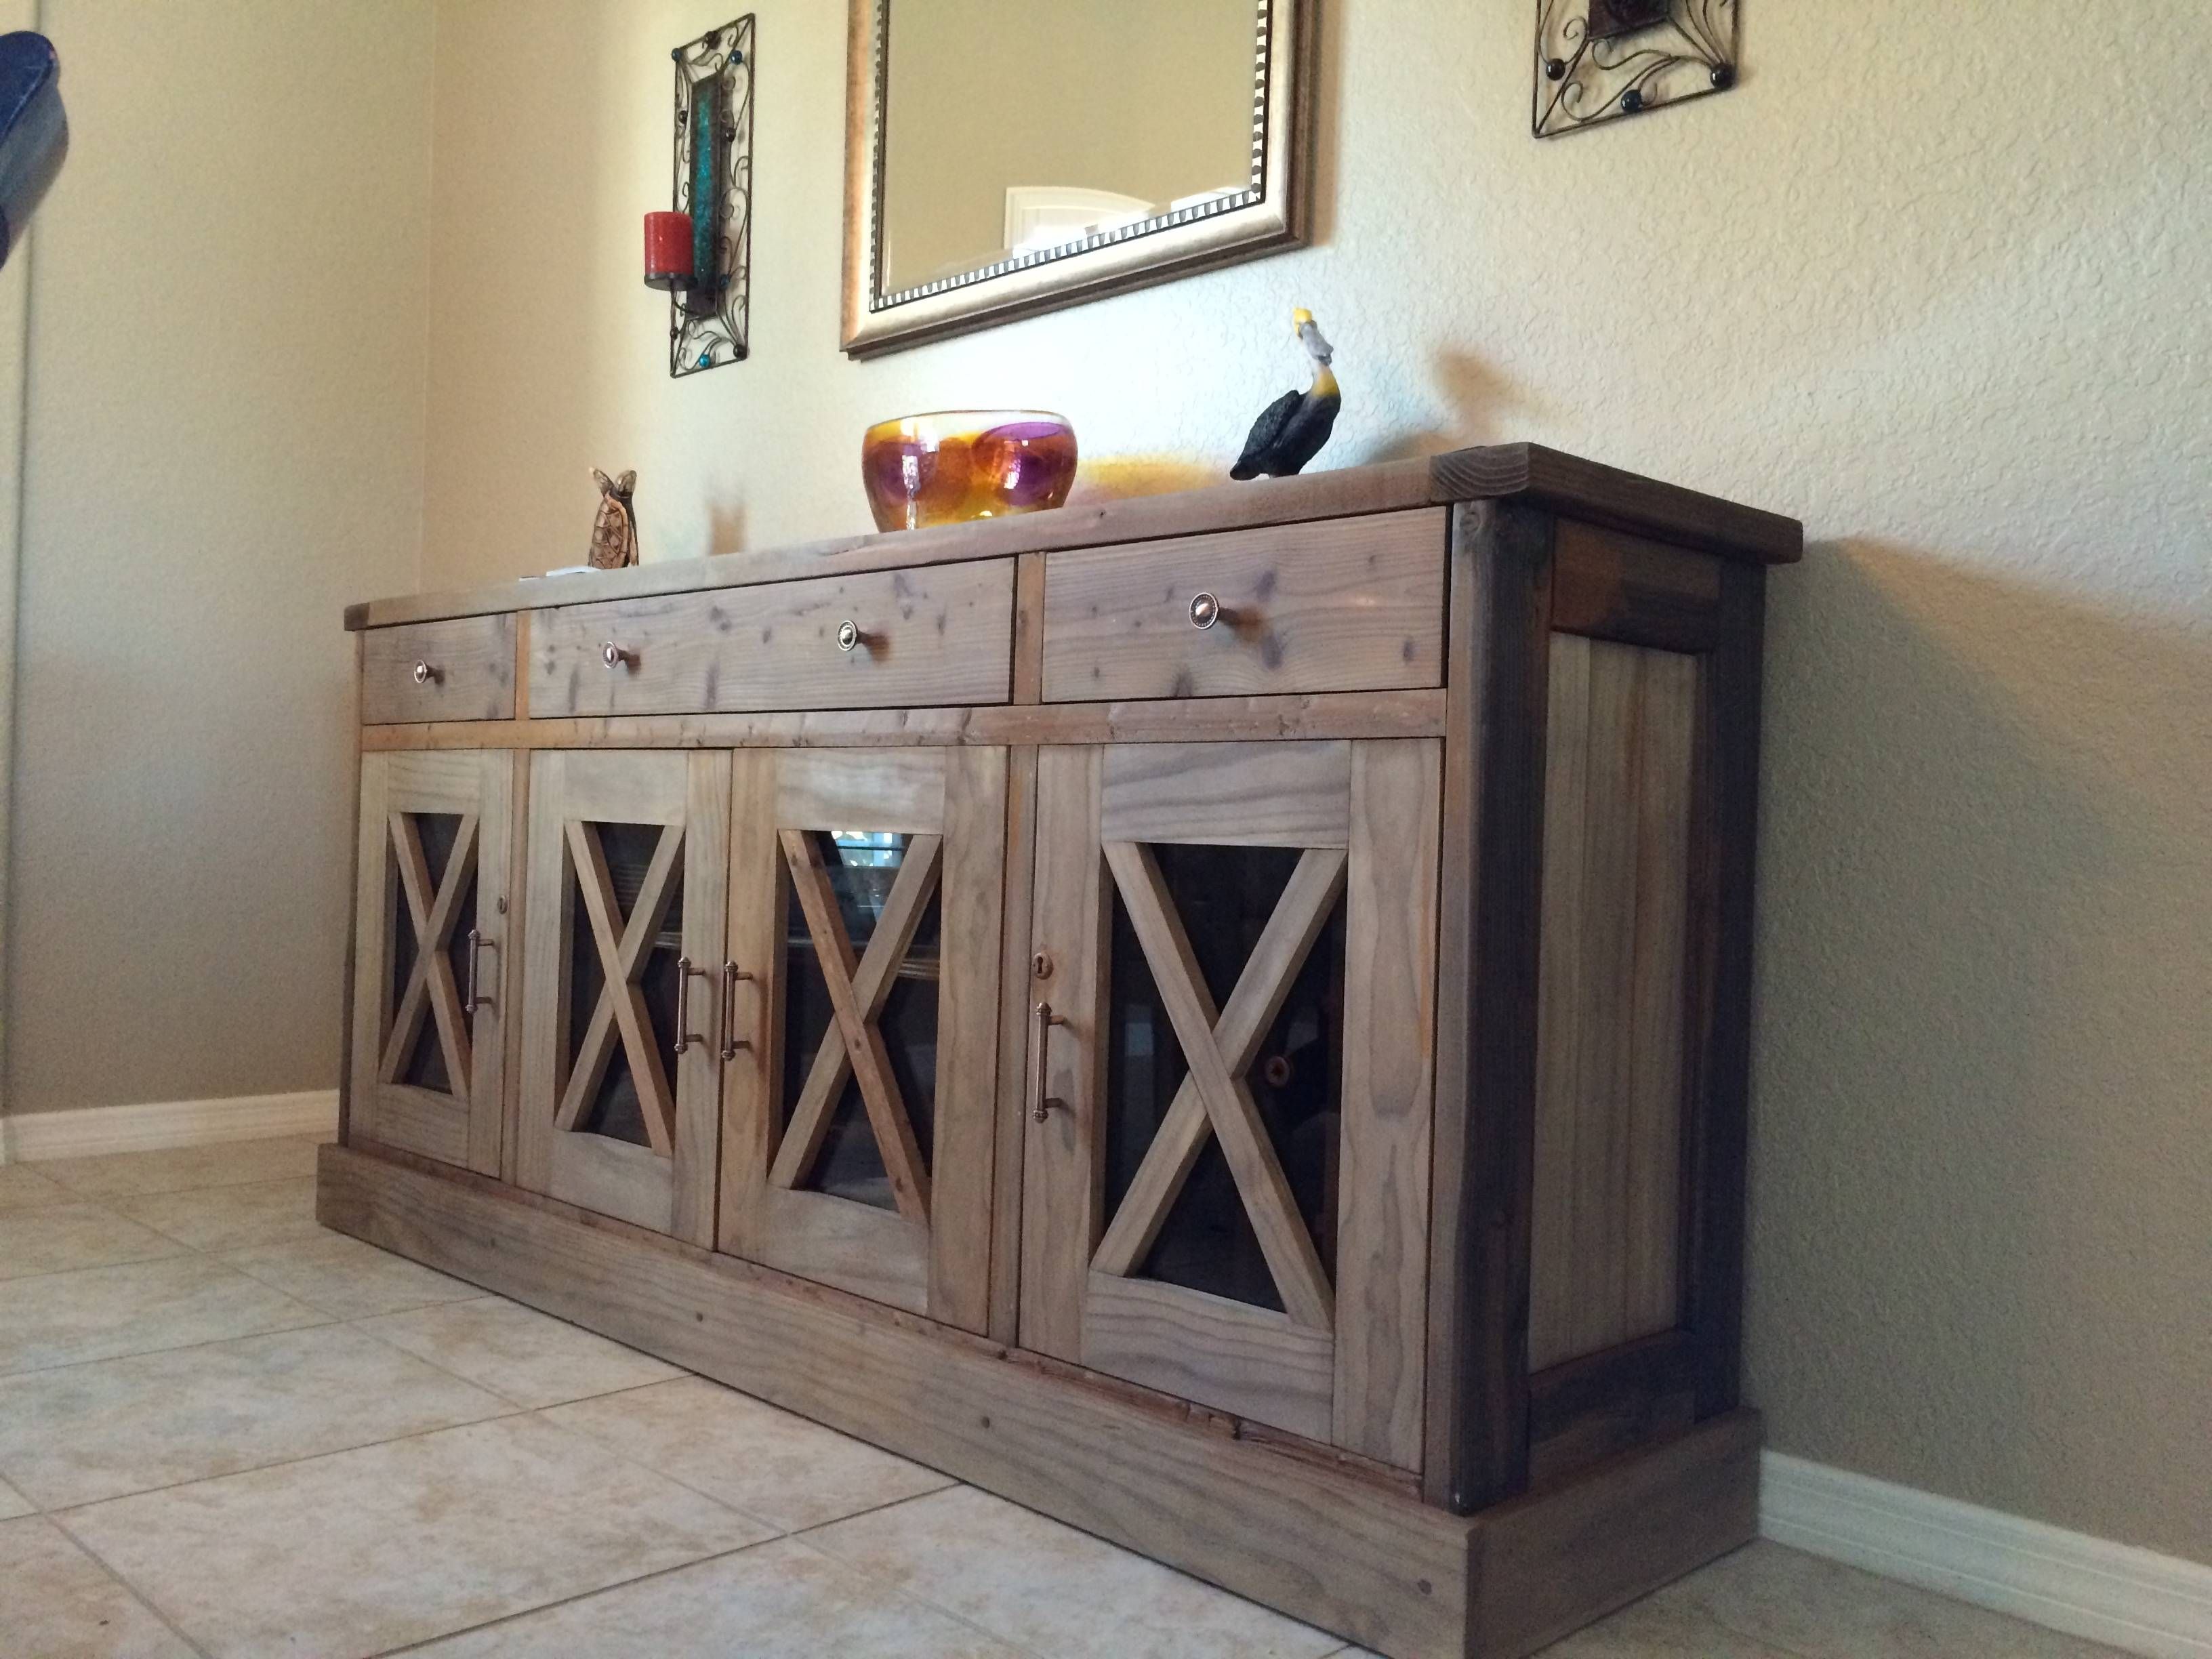 Ana White | Dining Room Sideboard – Diy Projects For Diy Sideboards (View 8 of 15)